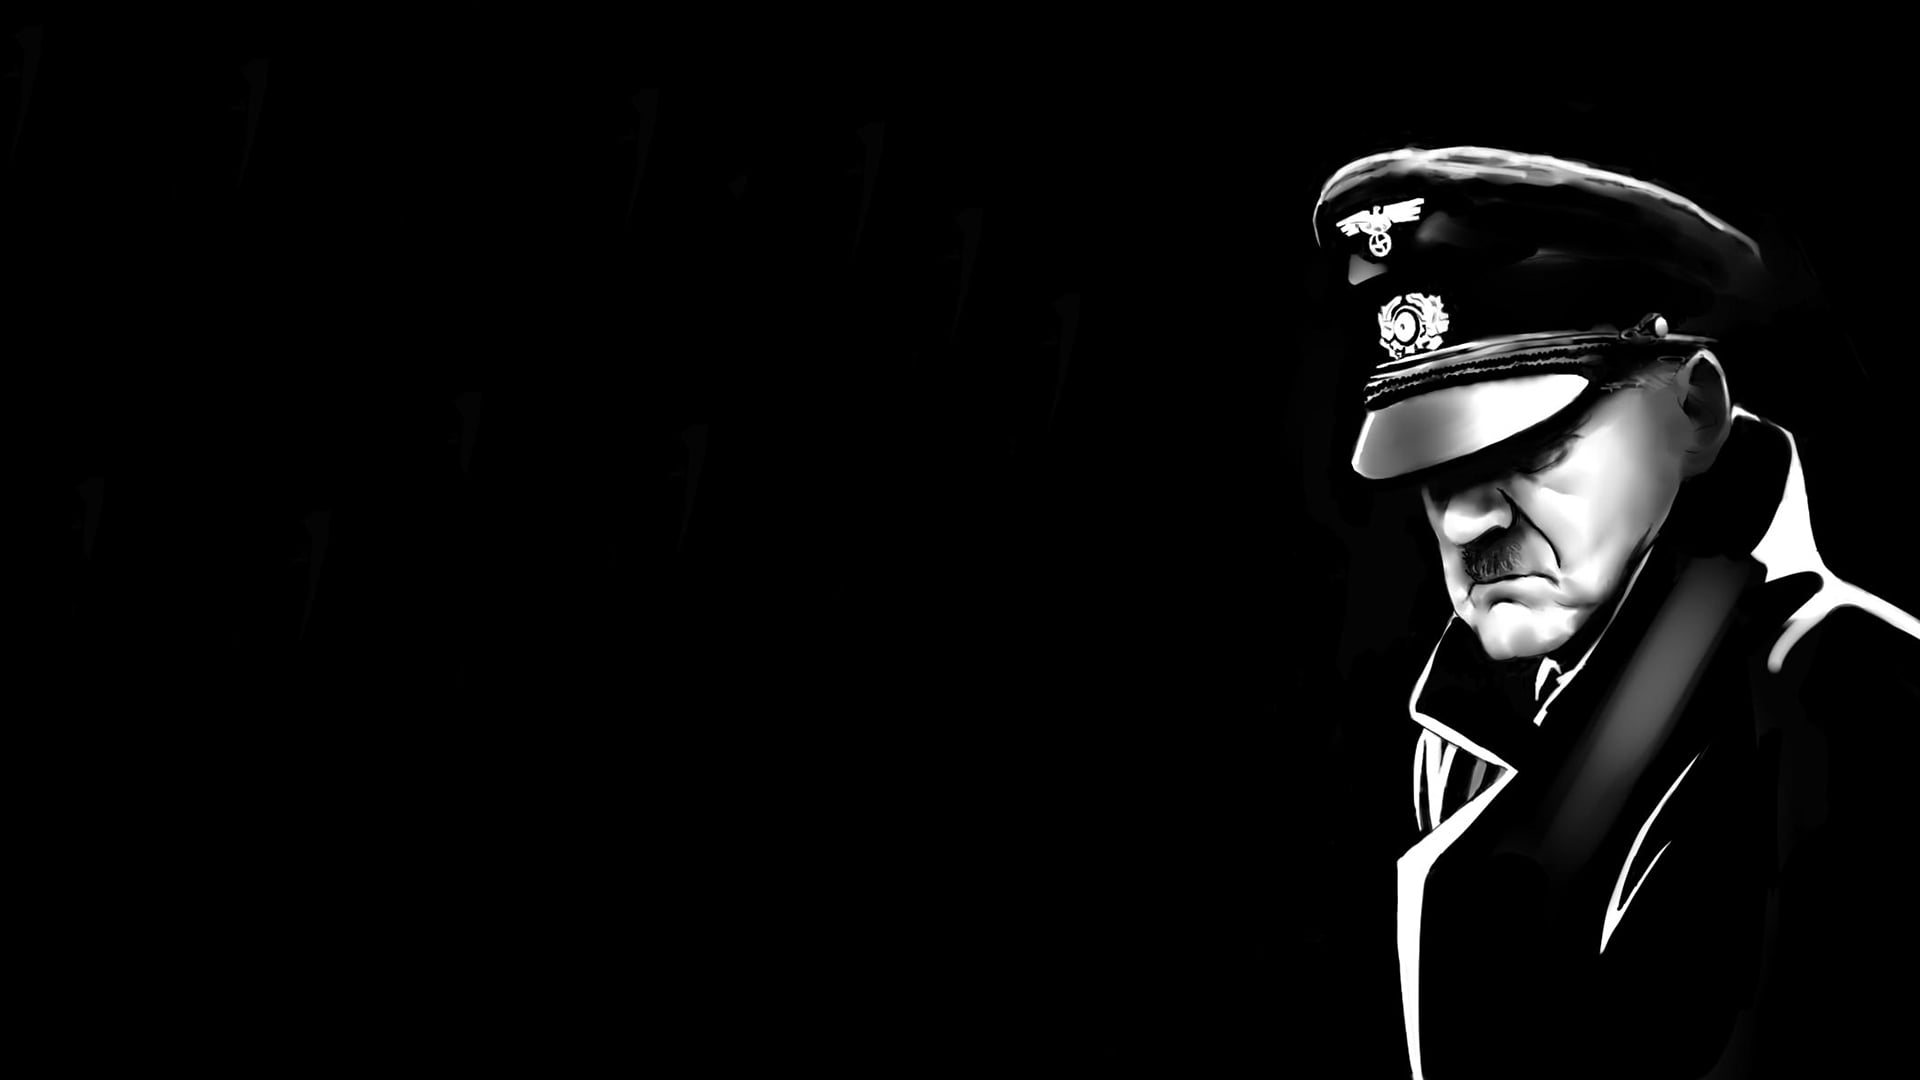 Grayscale Photo Of Man Wearing Peaked Hat Adolf Hitler Nazi Images, Photos, Reviews